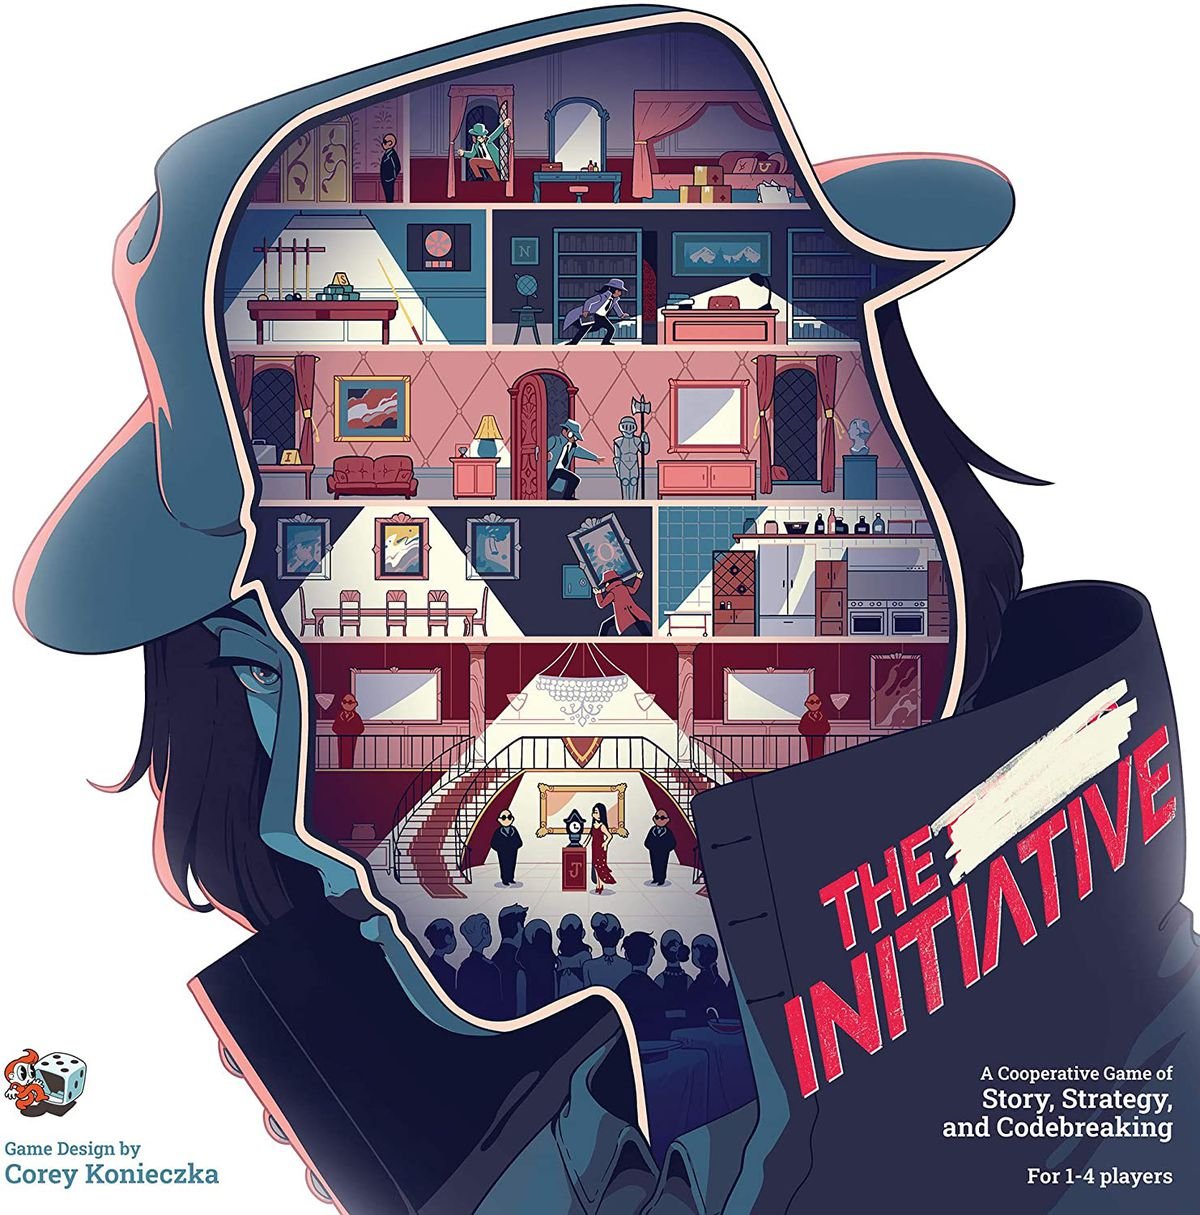 Cover art for The Initiative shows a silhouette of a spy, her face cut away to reveal the interior of an office building.